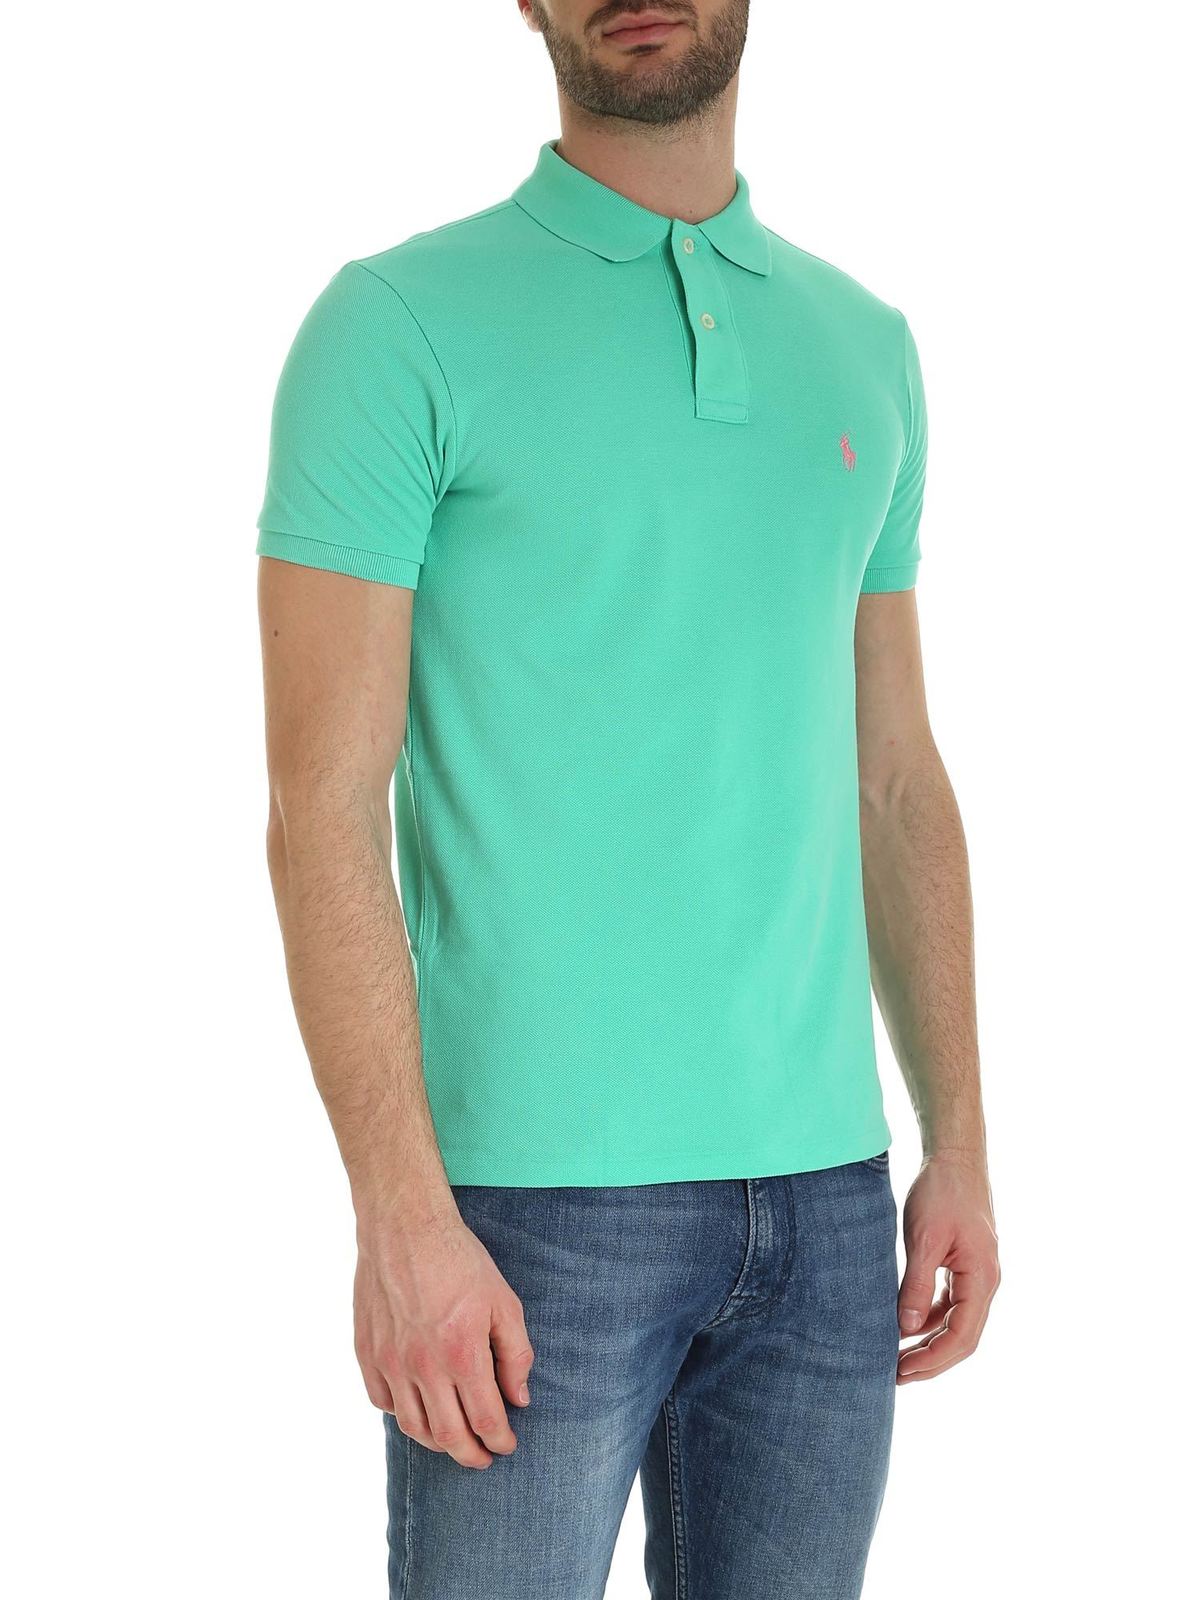 Polo shirts Polo Ralph Lauren - Slim fit polo shirt in mint green with pink  l - 710795080020